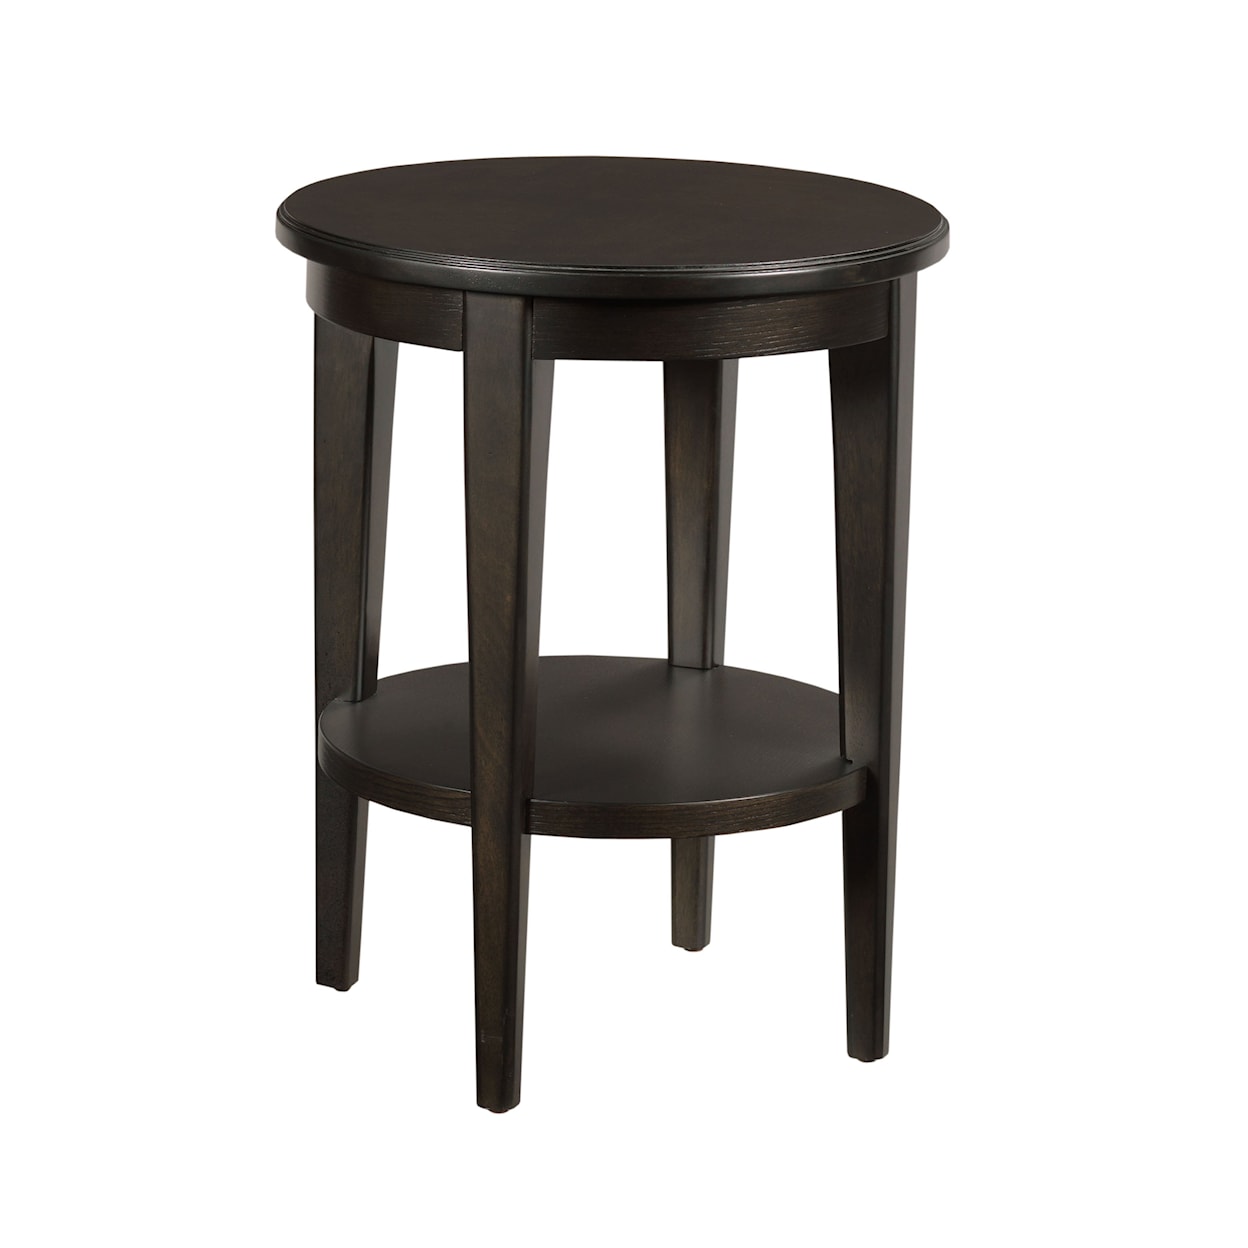 Hammary Encore Chairside Table